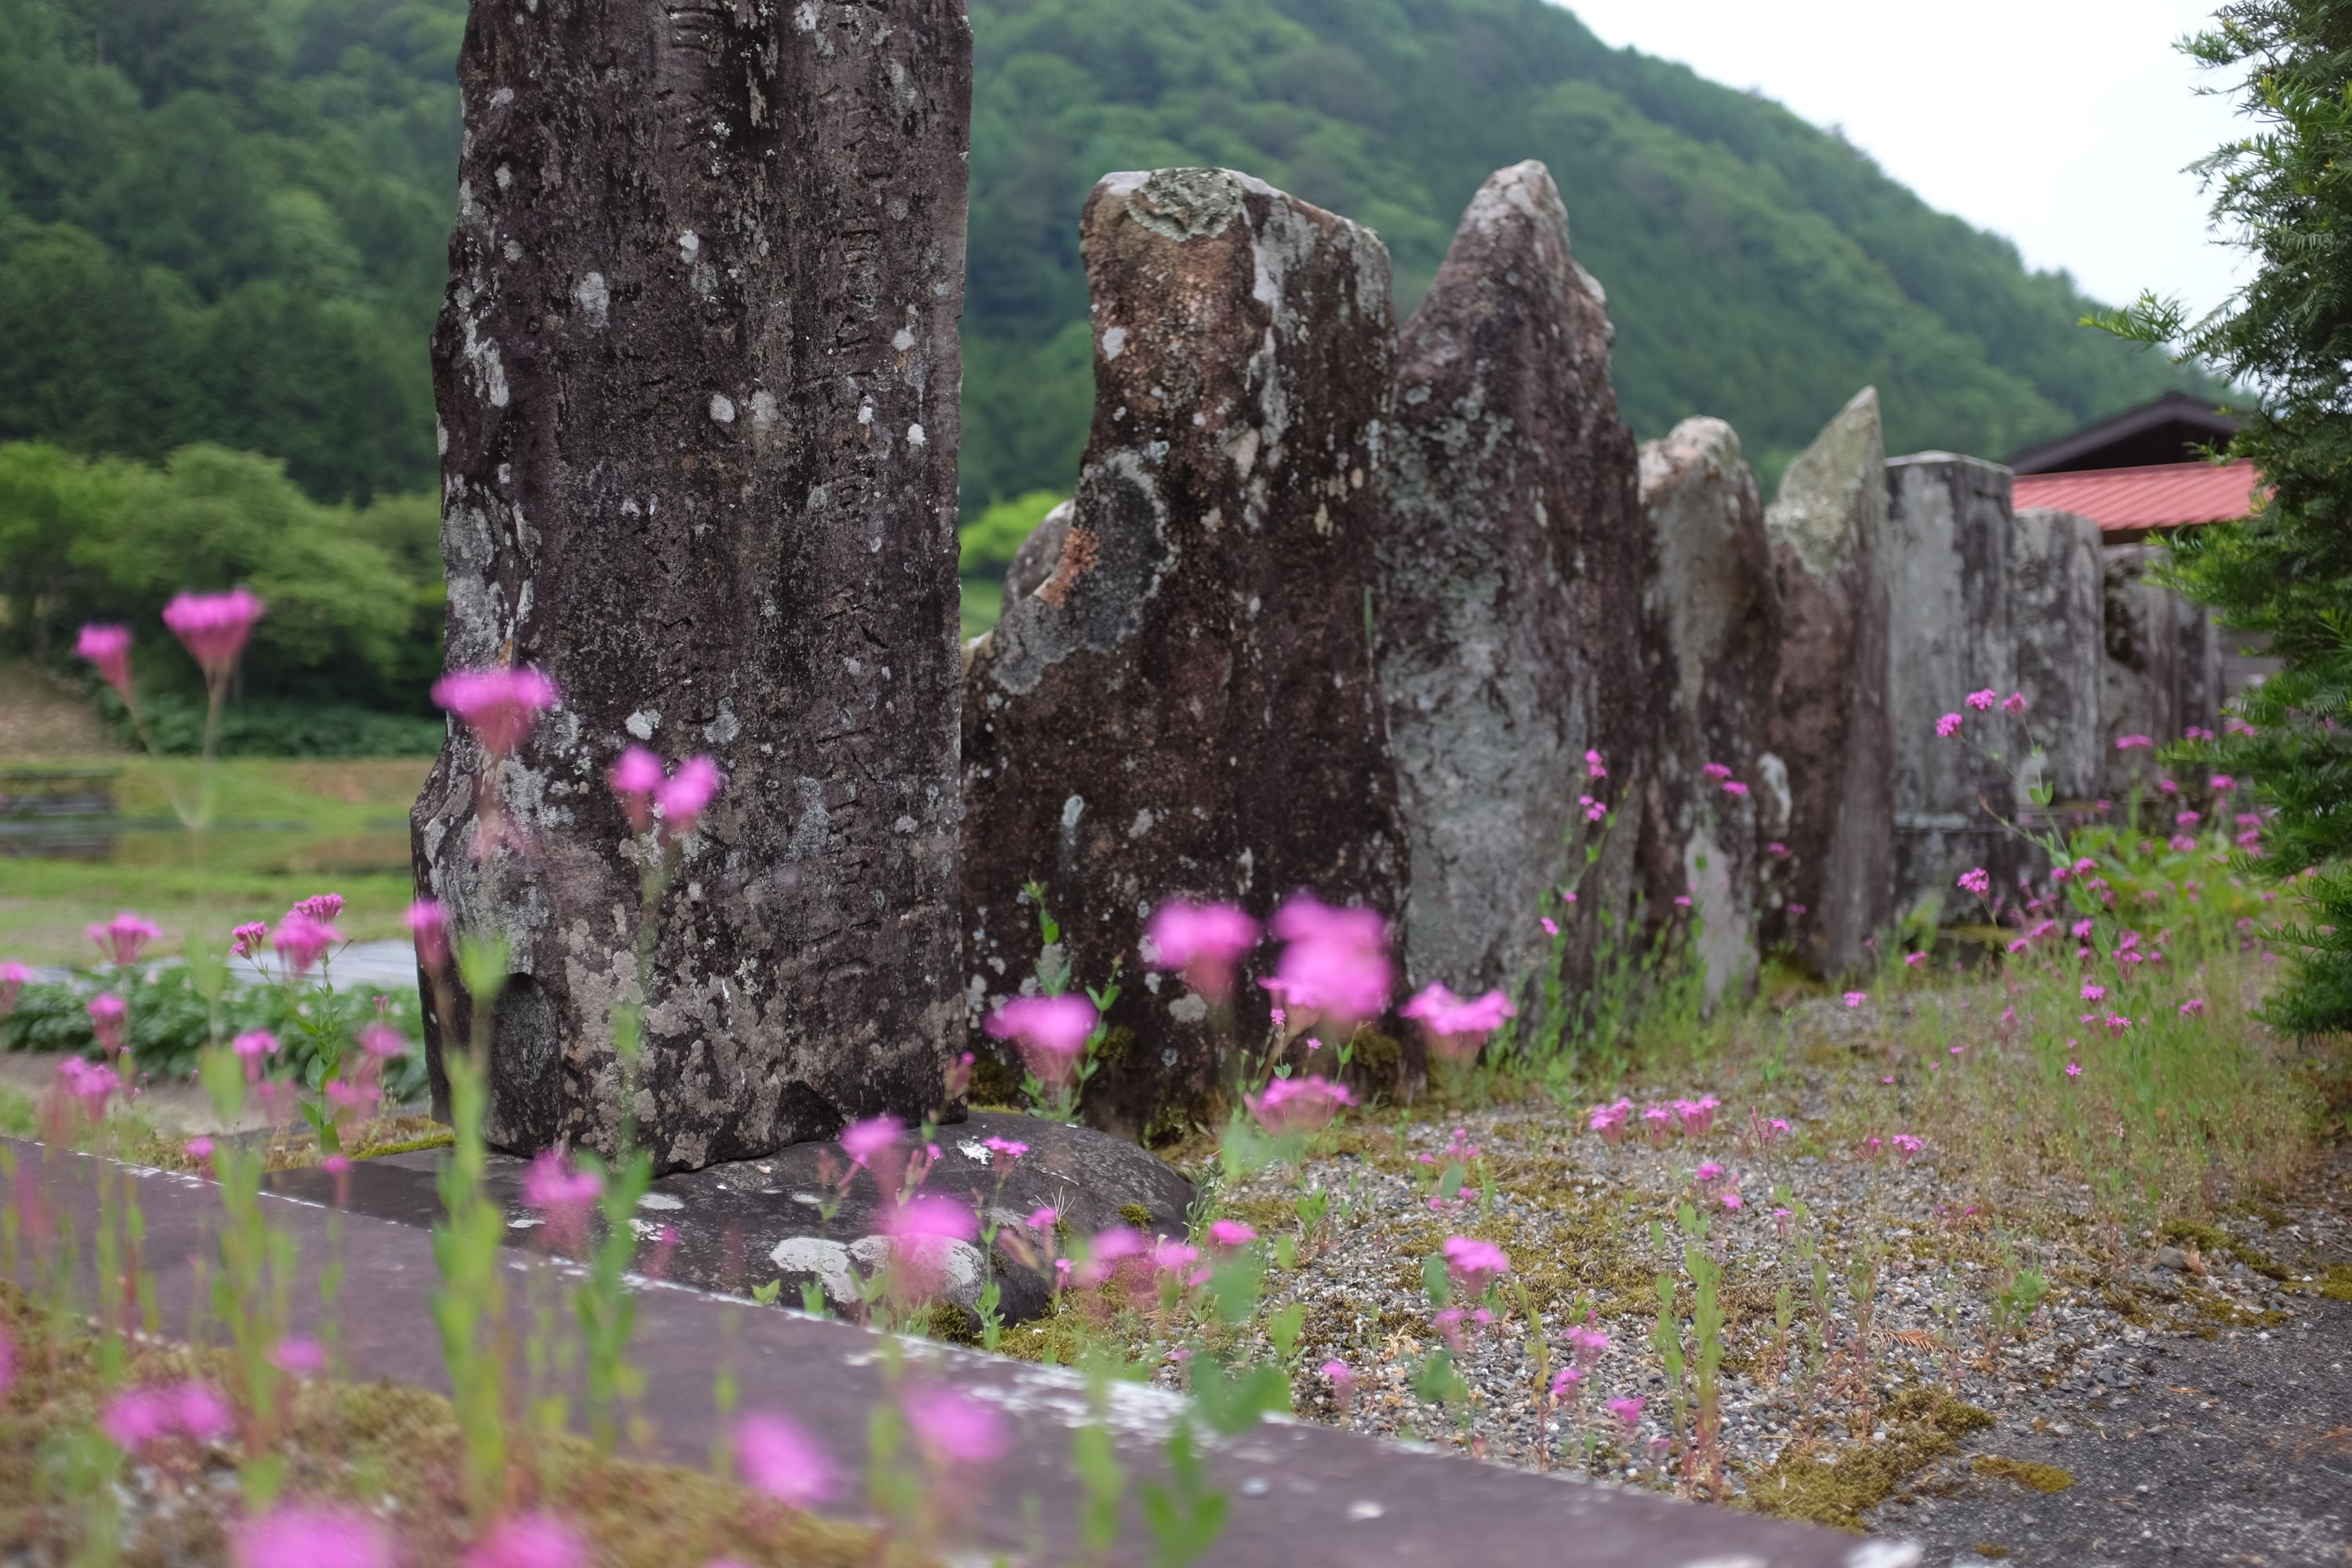 Lichen-covered medieval road markers flanked by pink flowers.